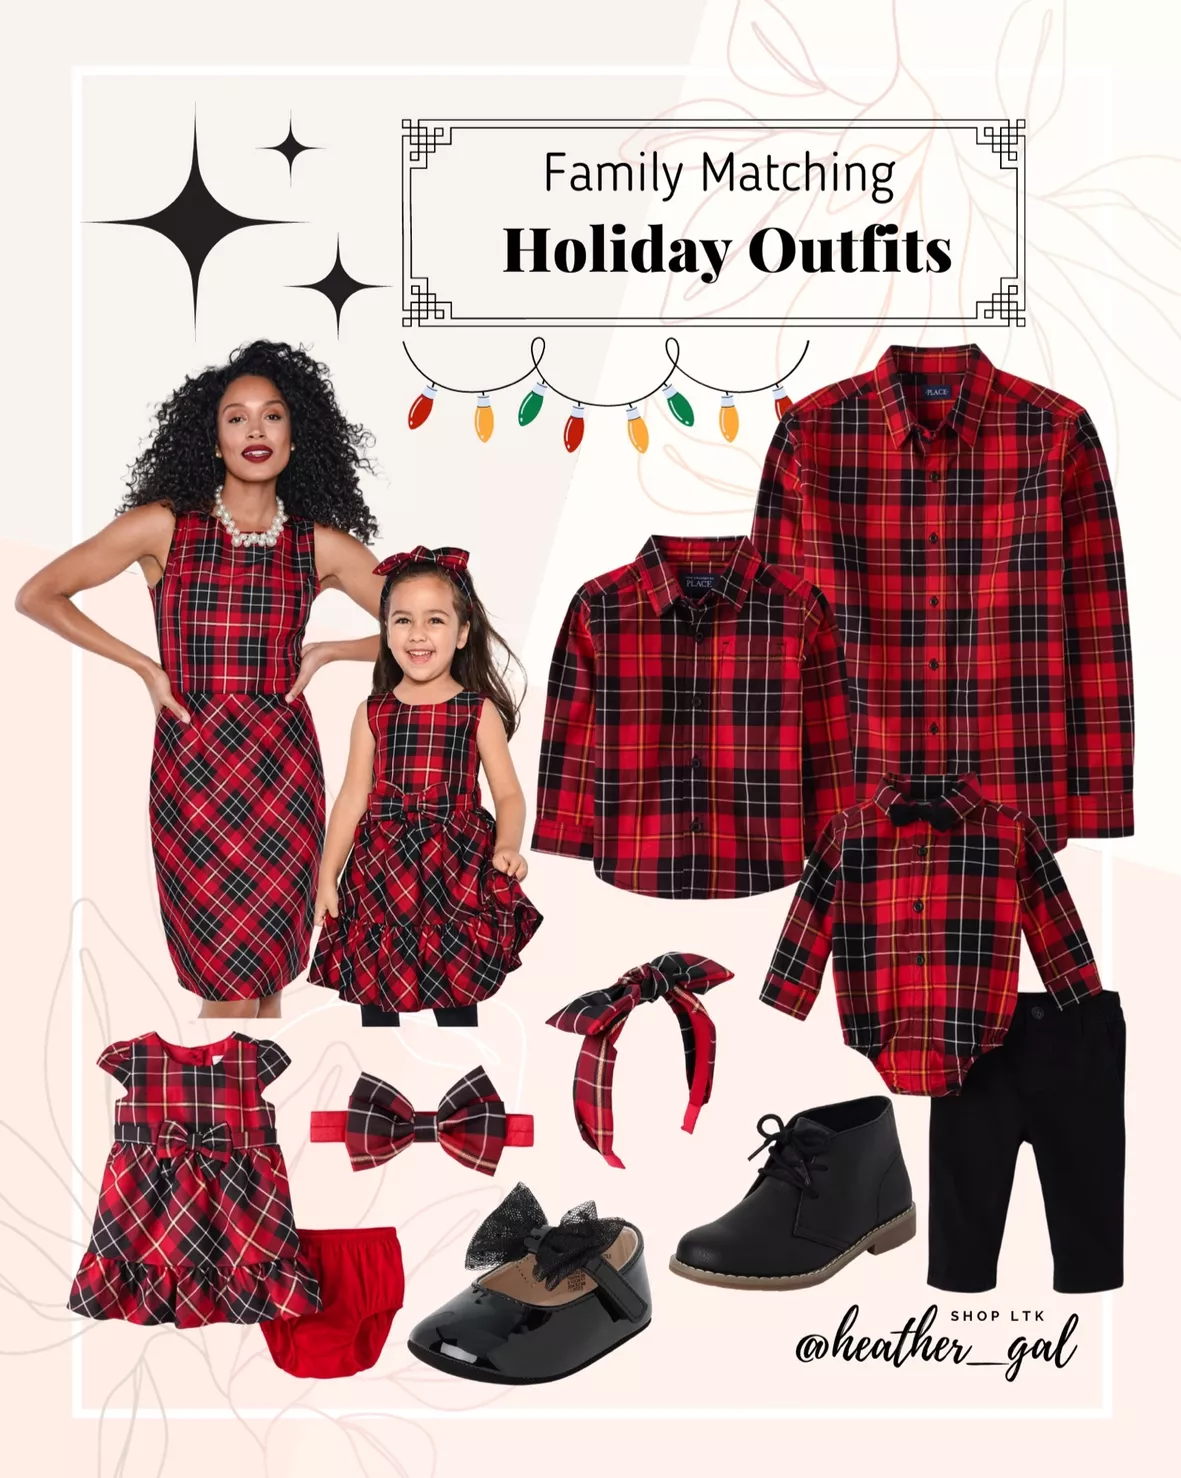 Holiday outfit ideas  Christmas outfits women, Holiday outfits